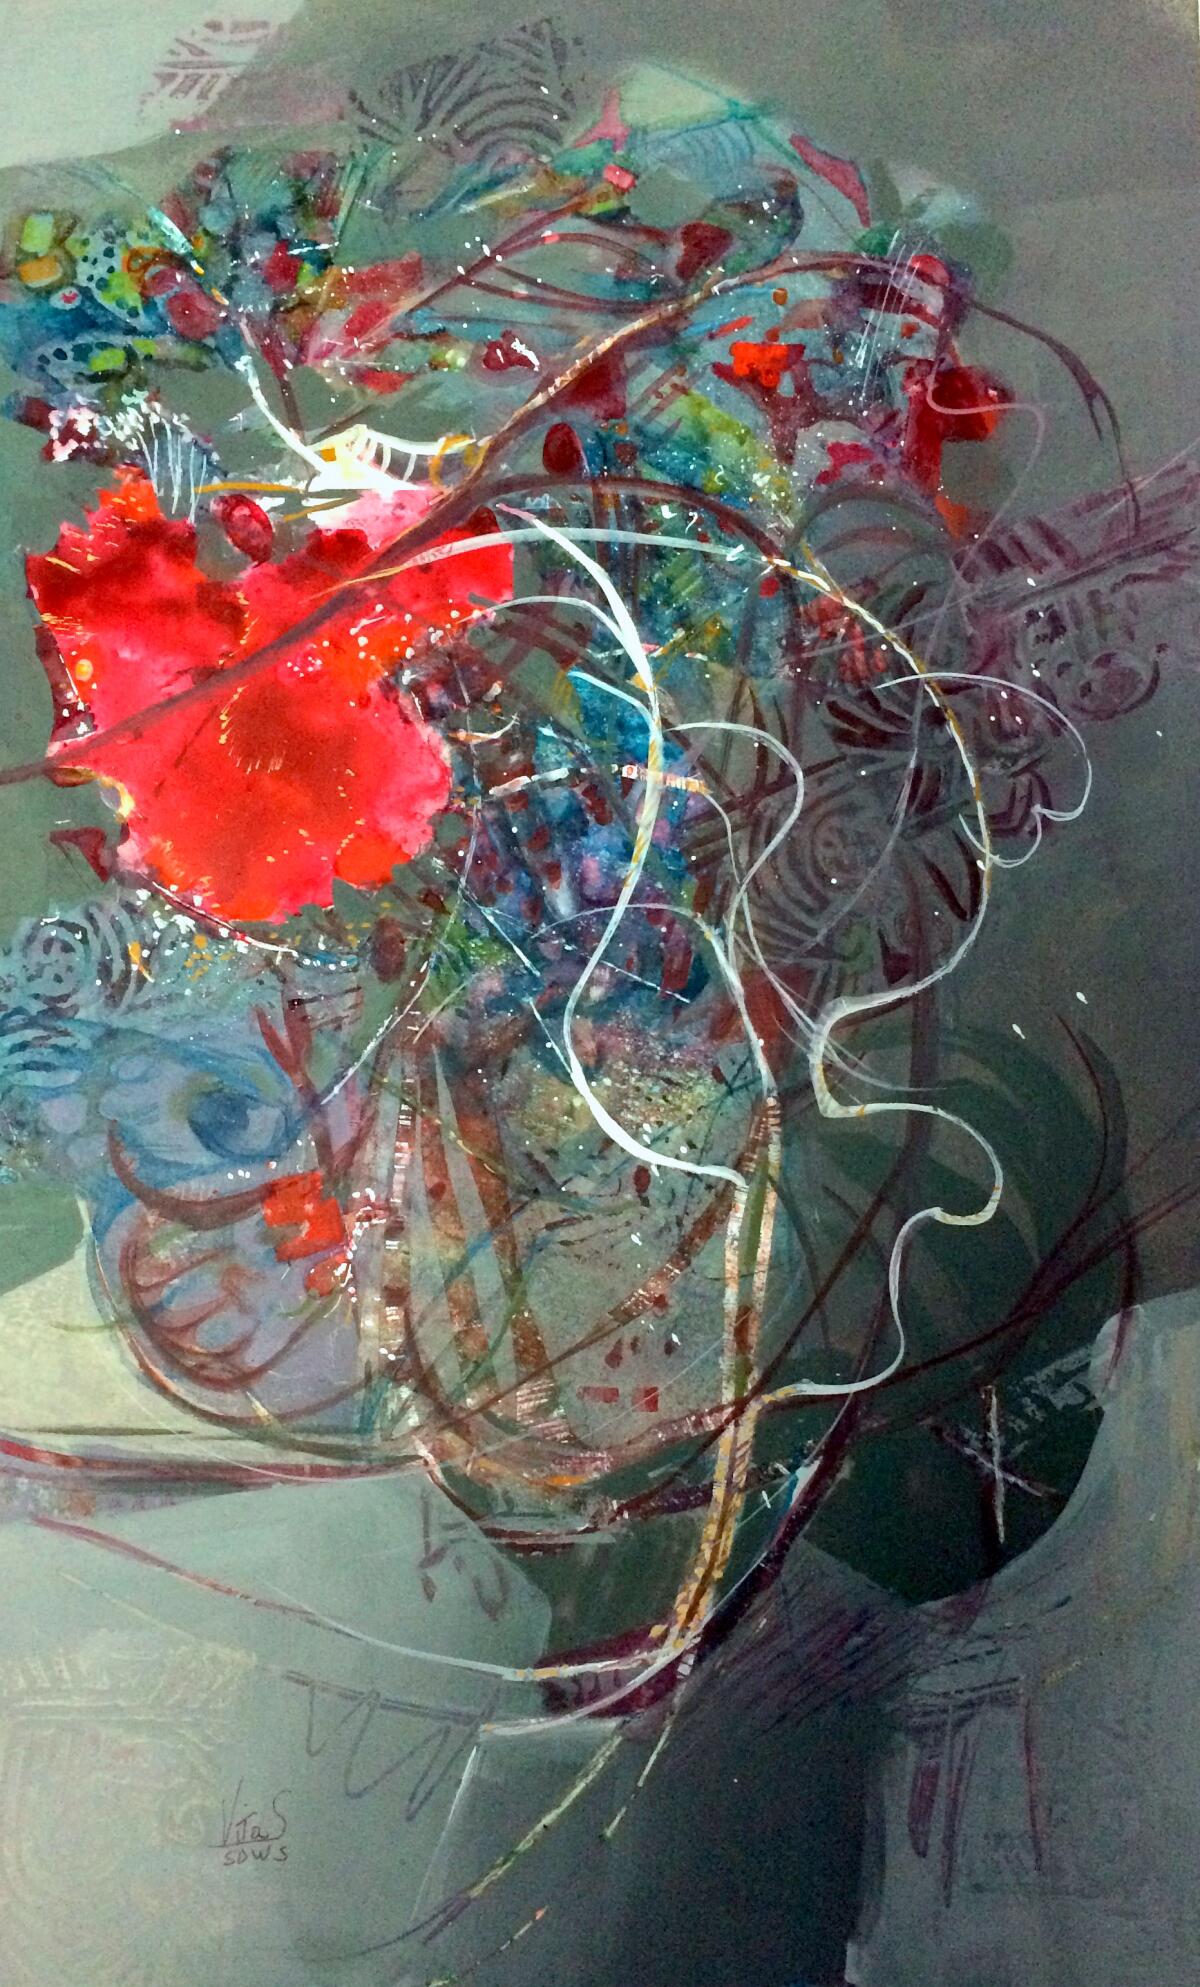 ‘Madam B’ by Vita Sorrentino is one of the artworks among the artworks offered for view and sale at La Jolla Community Center’s online gallery in partnership with La Jolla Art Association.